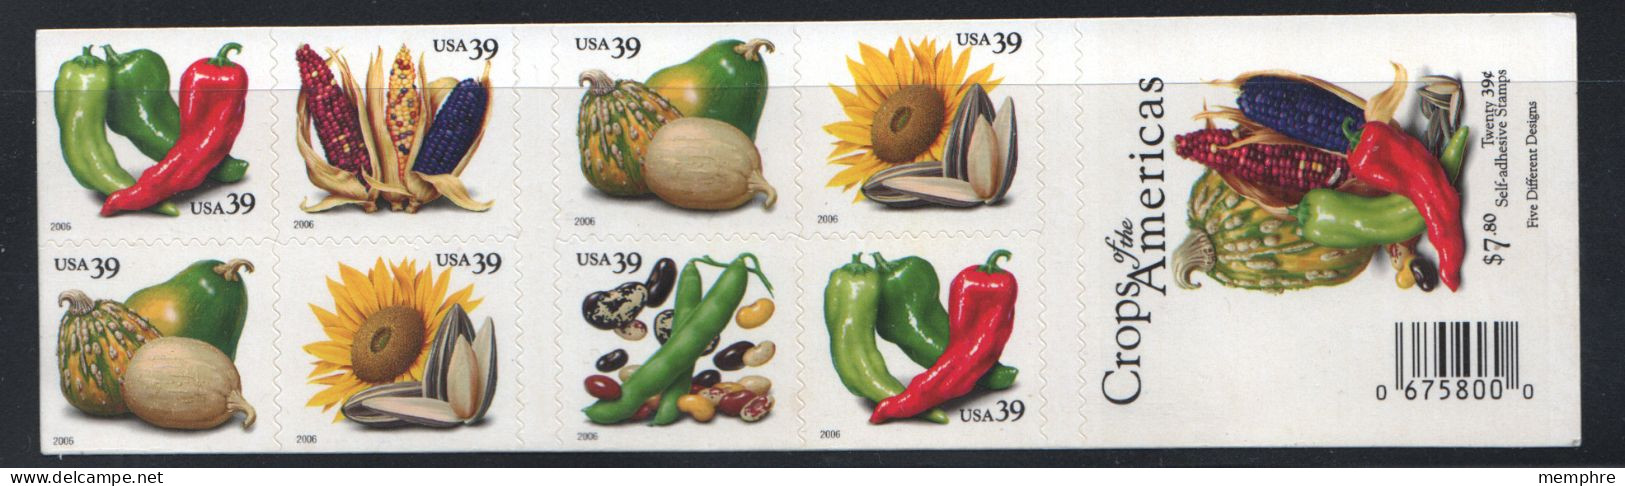 2006  Crops Of The Americas' Chili Peppers, Beans, Sunflower, Squashes, Corn Booklet Of 20 Sc 4012b - Nuovi